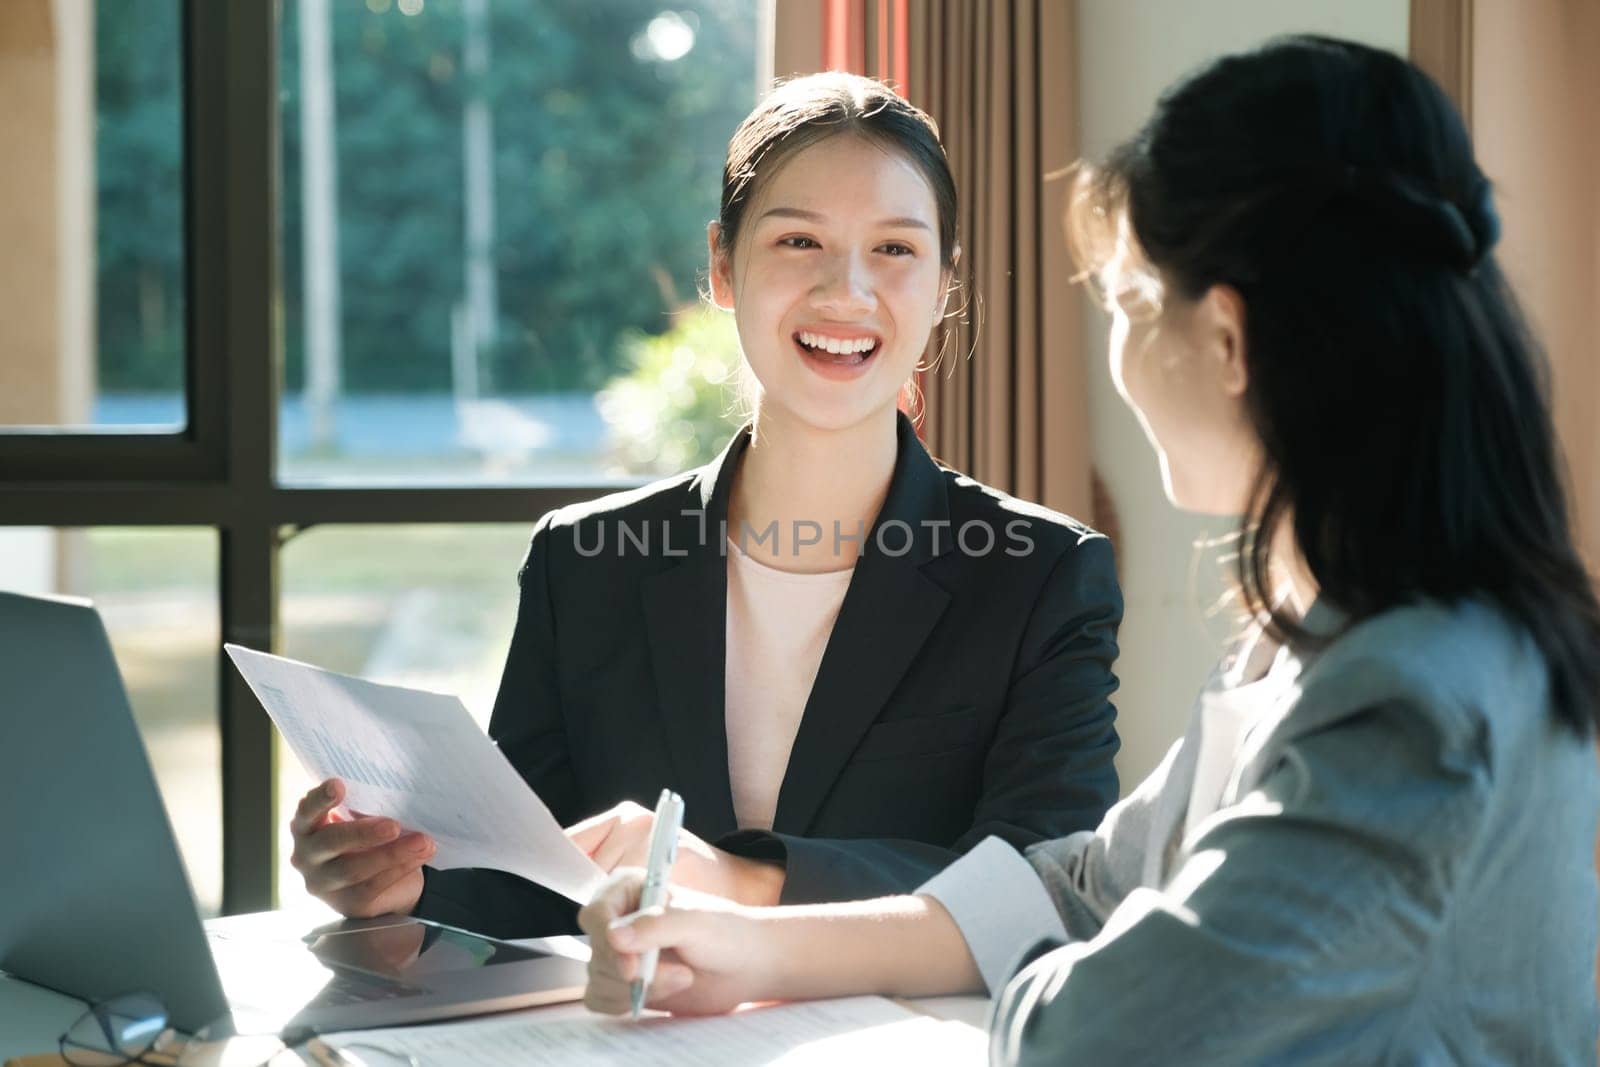 Two women in business suits are talking to each other. One of them is holding a piece of paper